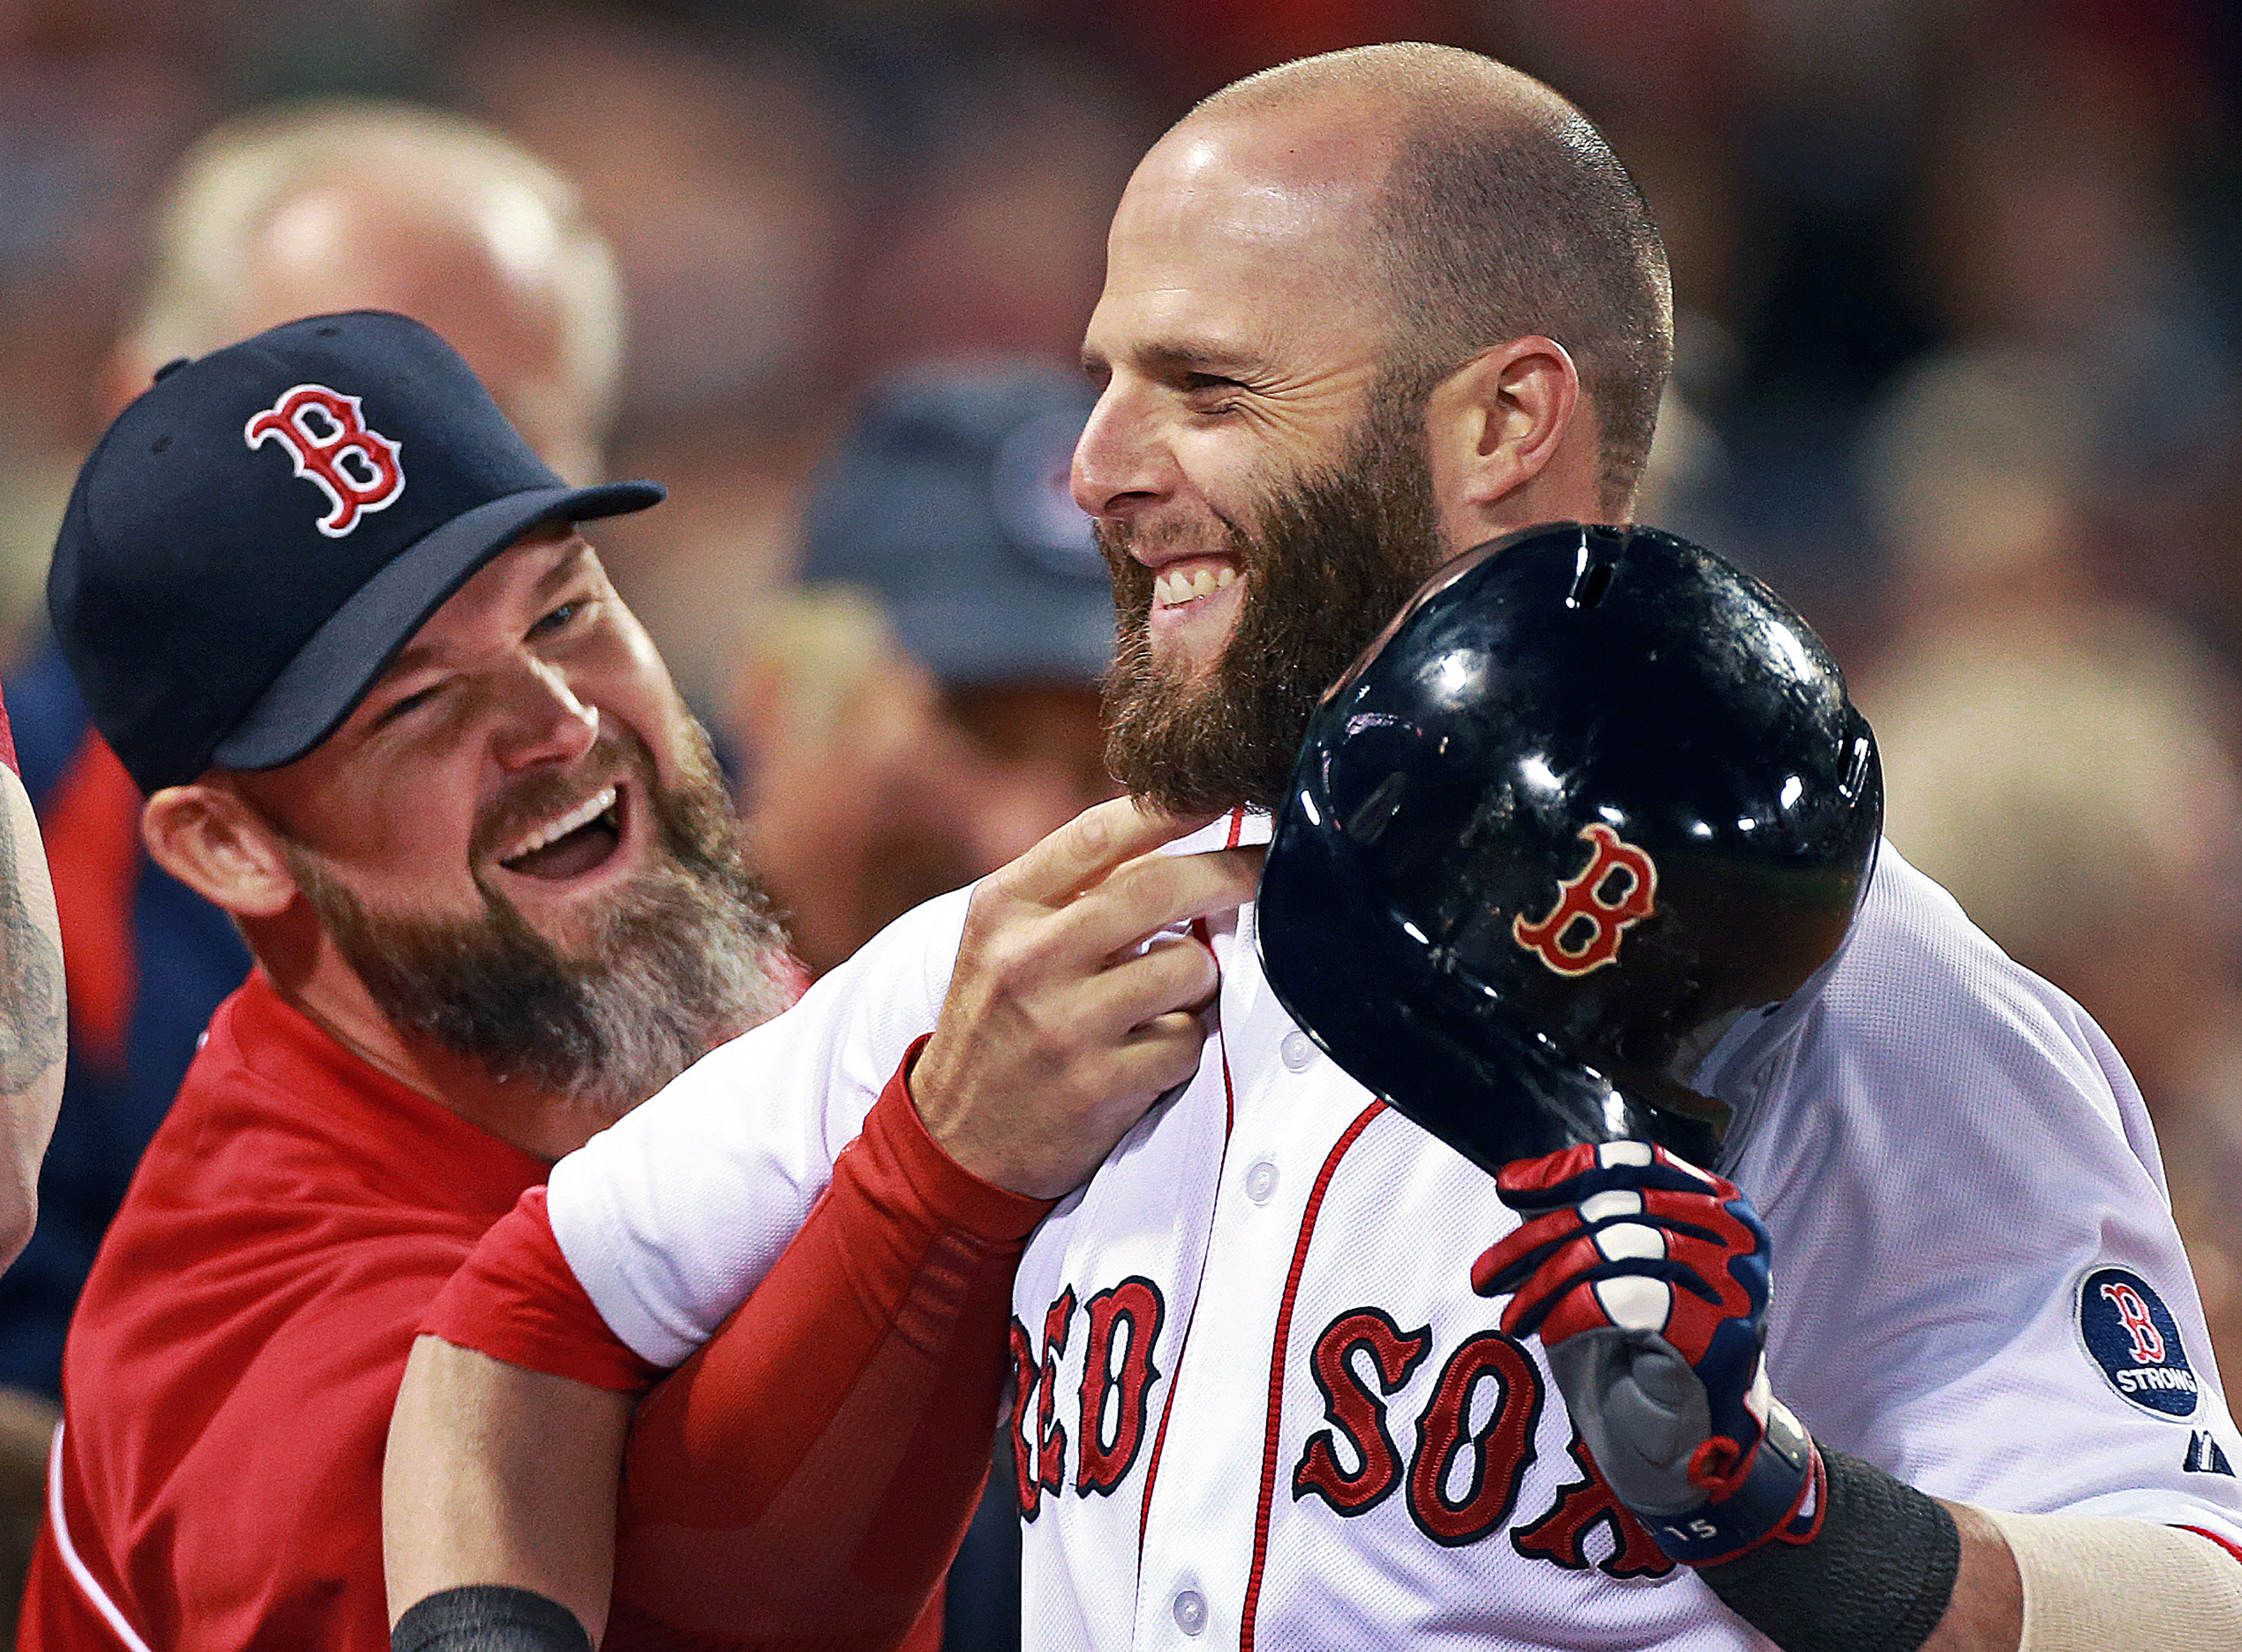 MLB - Dustin Pedroia has officially announced his retirement after a  14-year career. Congrats to the Boston Red Sox legend.